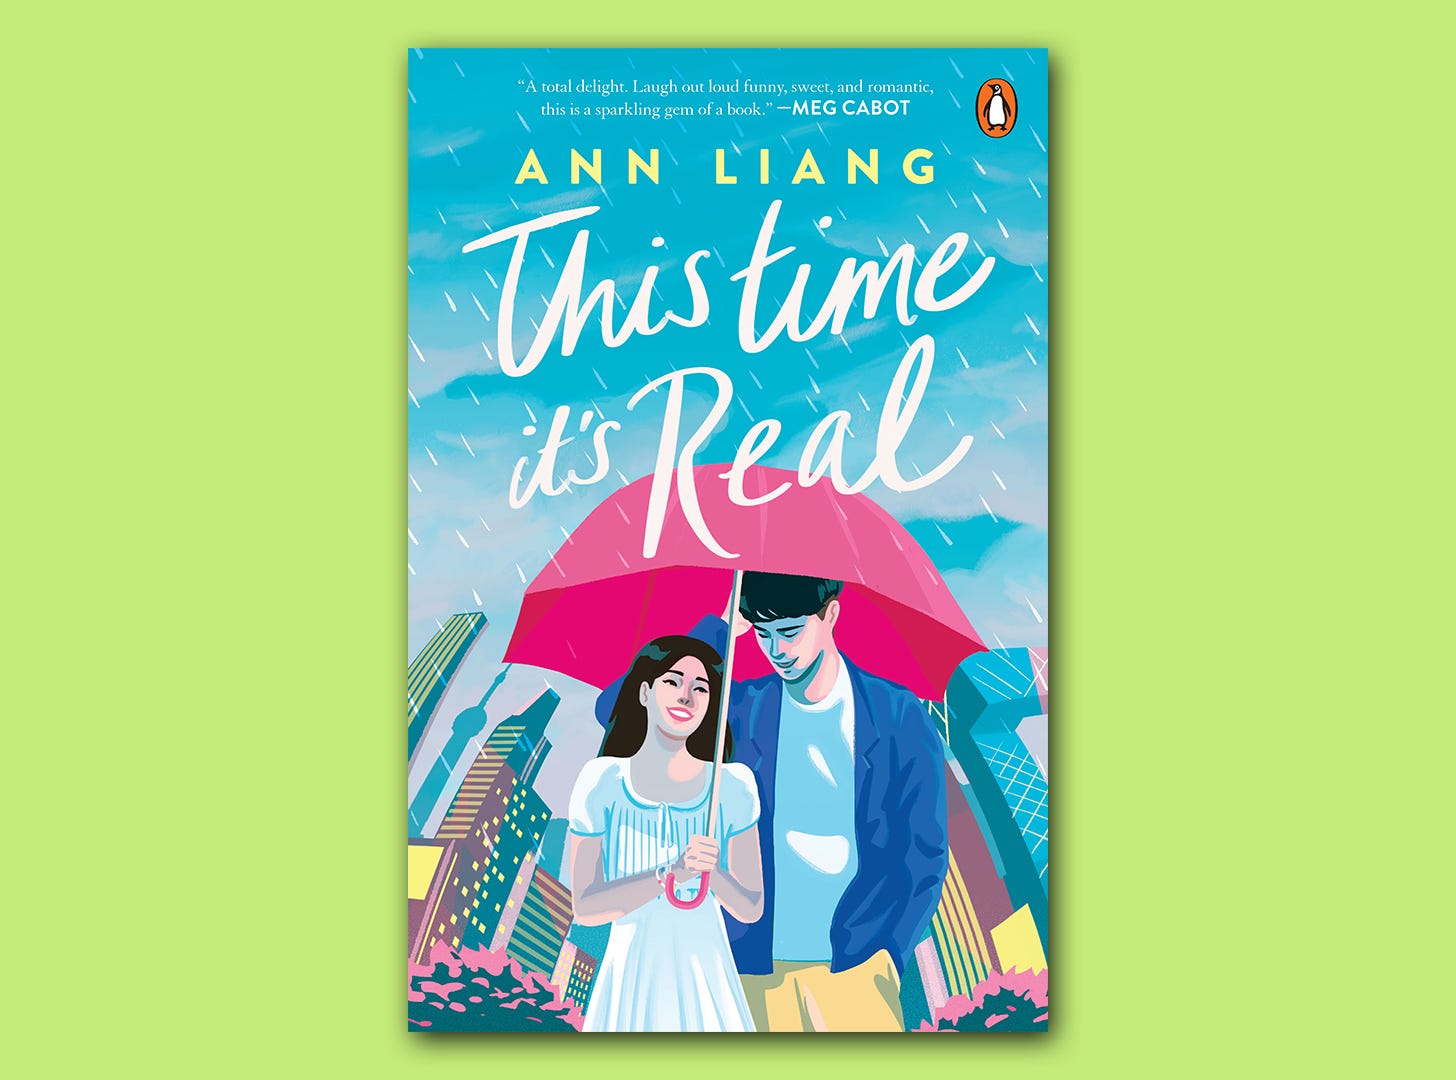 The book cover for 'This Time it's Real' superimposed on a light green colour block background. The book cover shows an illustration of a boy and a girl sharing a pink umbrella under a light rain shower.